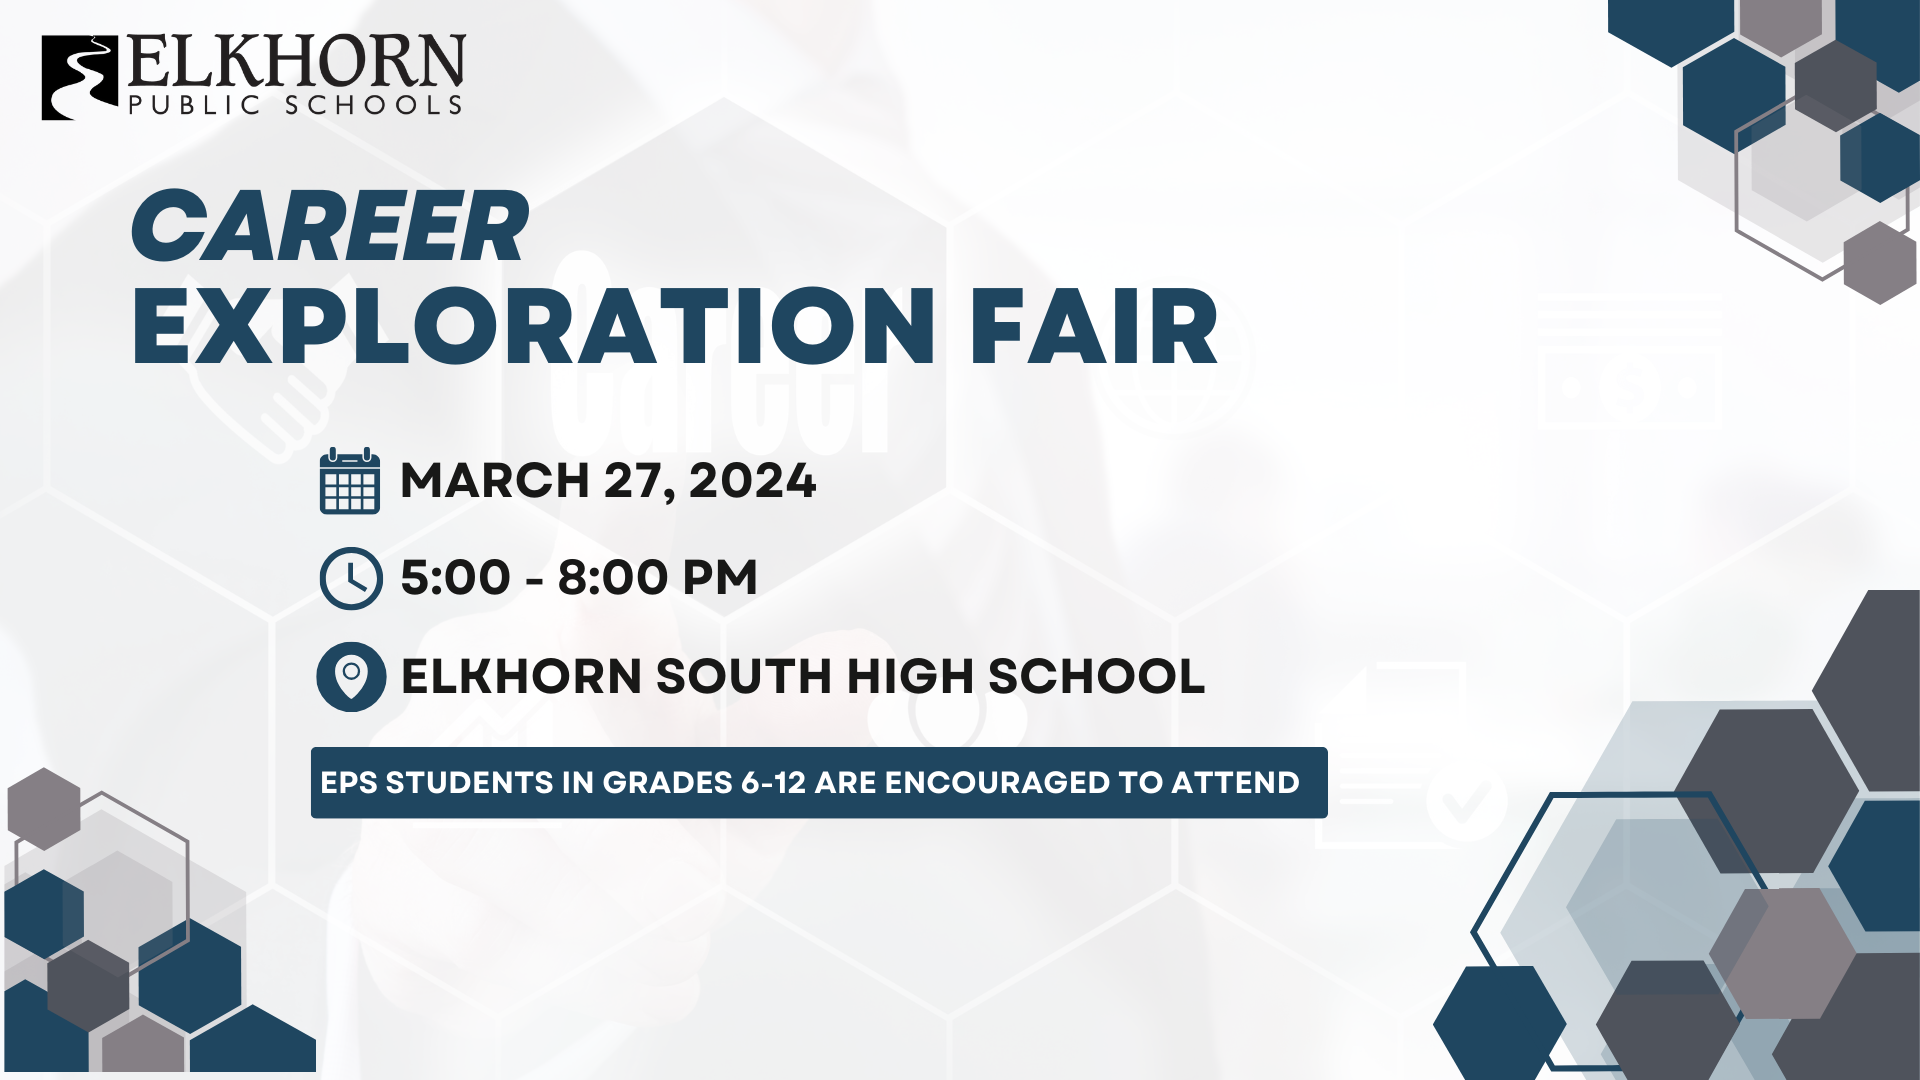 Career Exploration Fair, Wednesday, March 27, 2024 from 5:00 - 8:00 PM